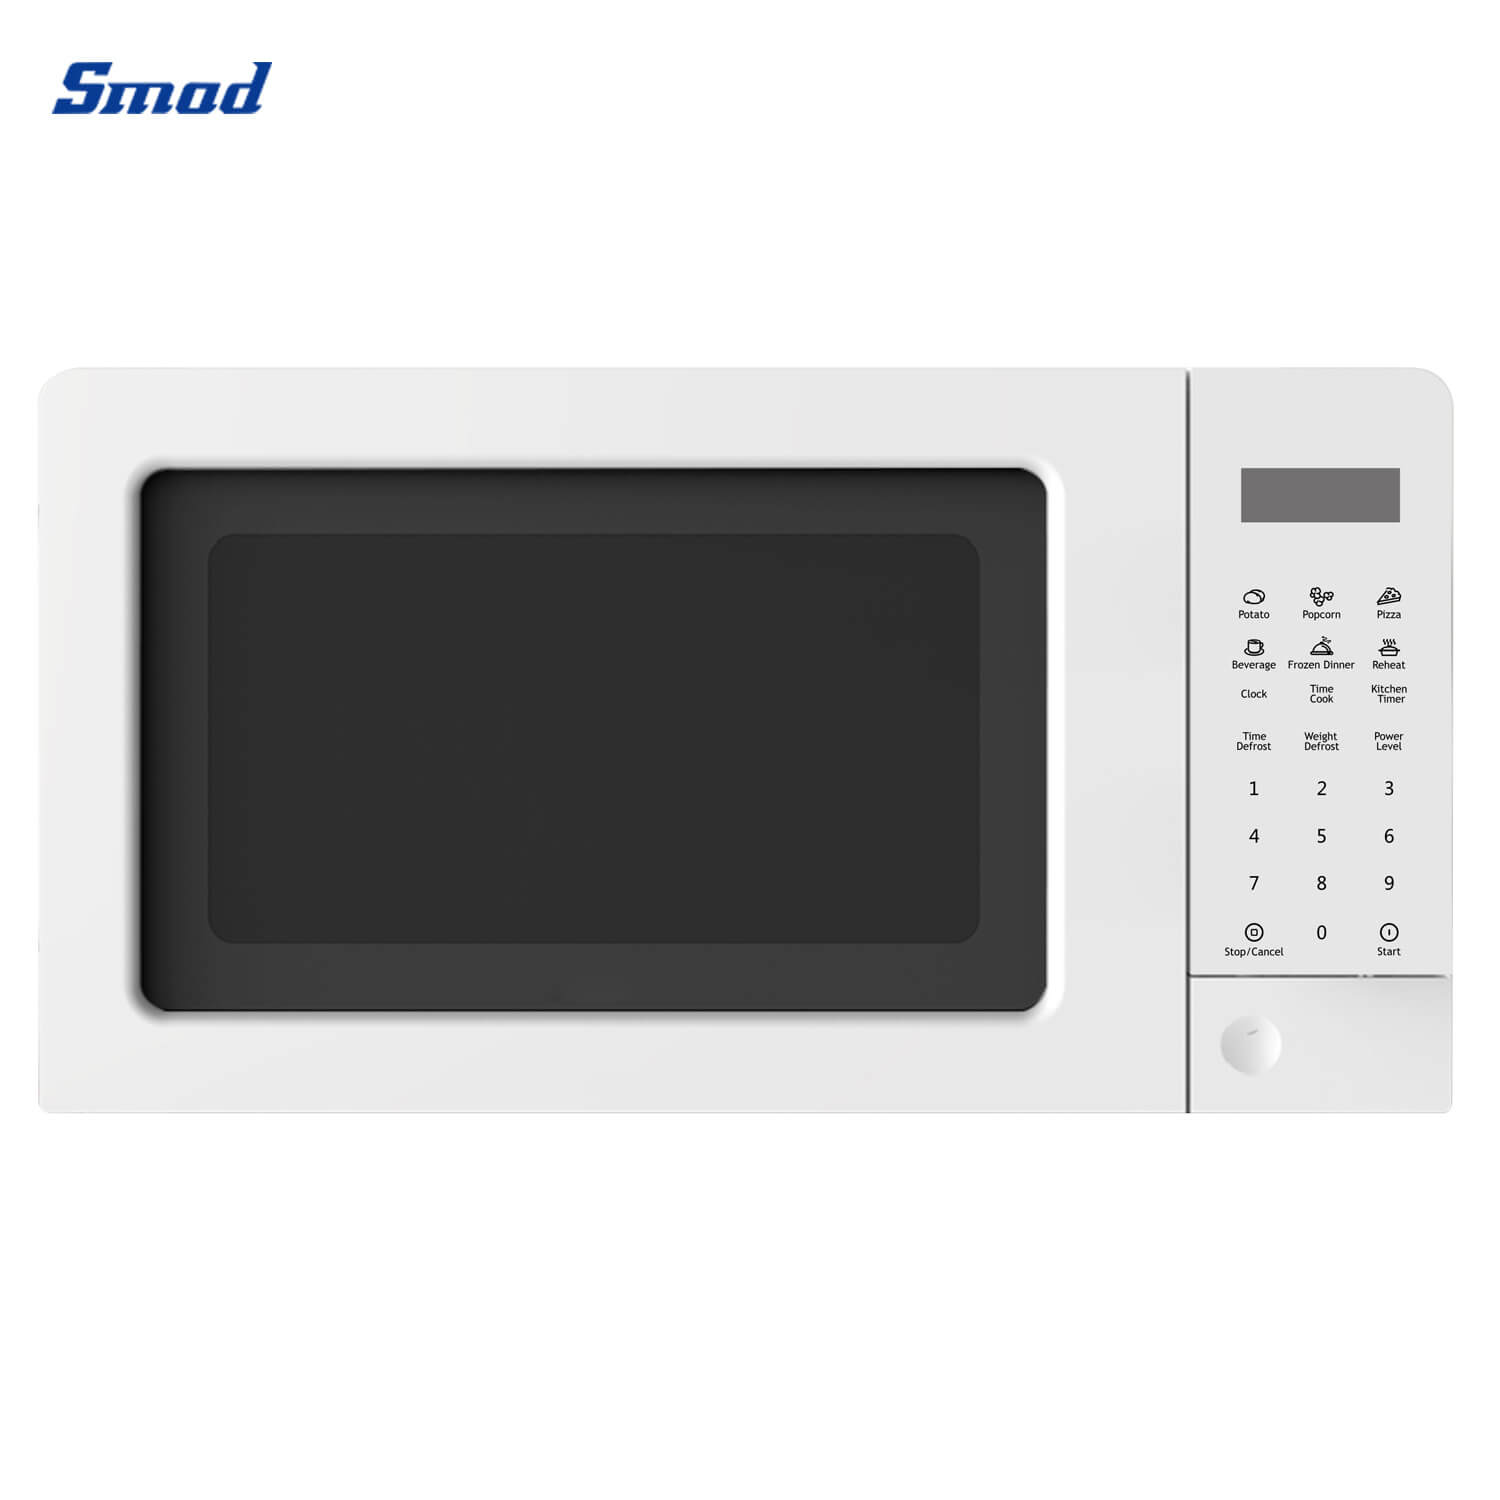 
Smad 20L Black / White Microwave Oven with LED Display